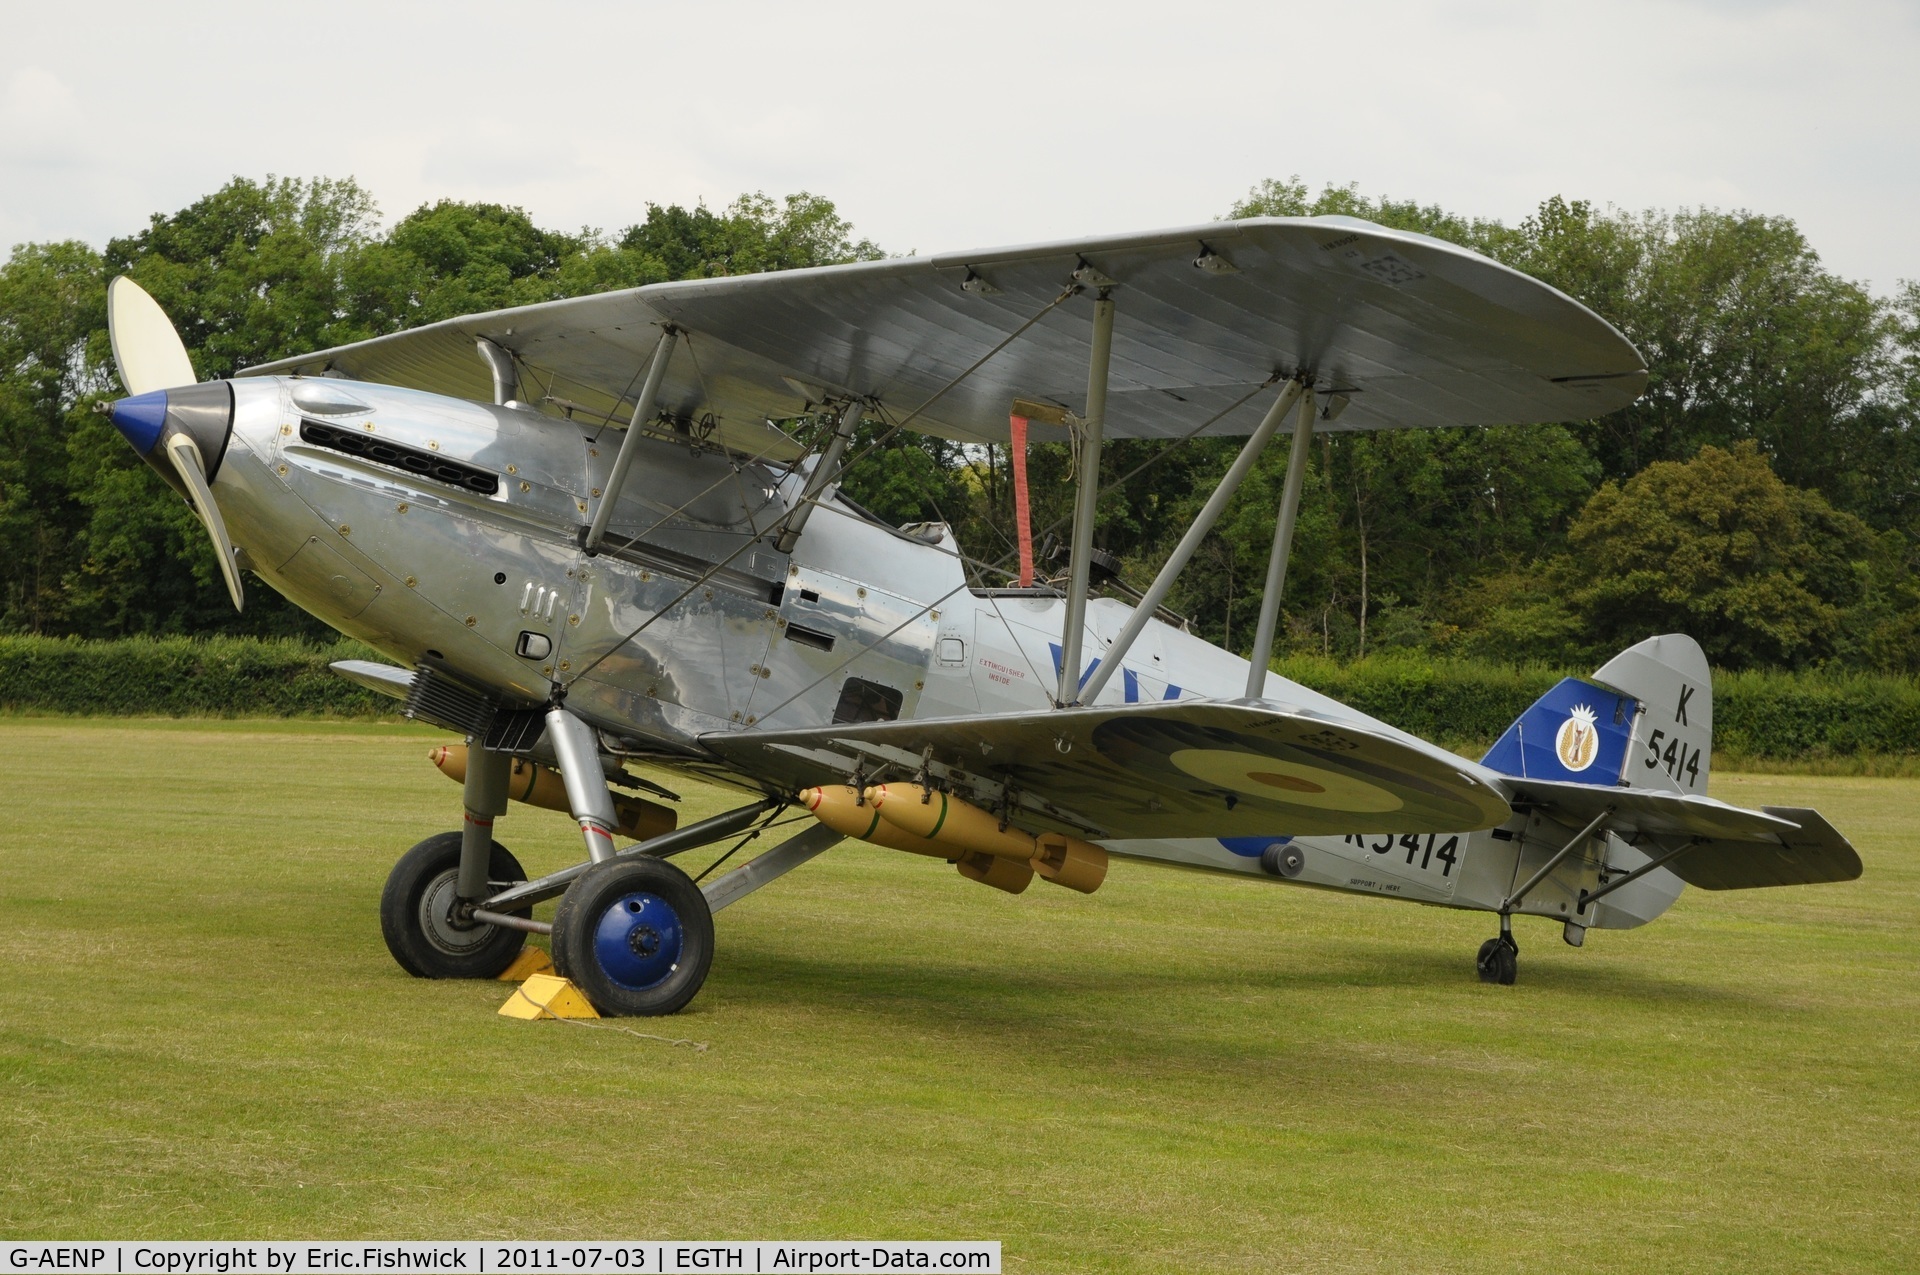 G-AENP, 1935 Hawker Hind C/N 41H/81902, 3. K5414 at Shuttleworth Military Pagent Air Display, July 2011